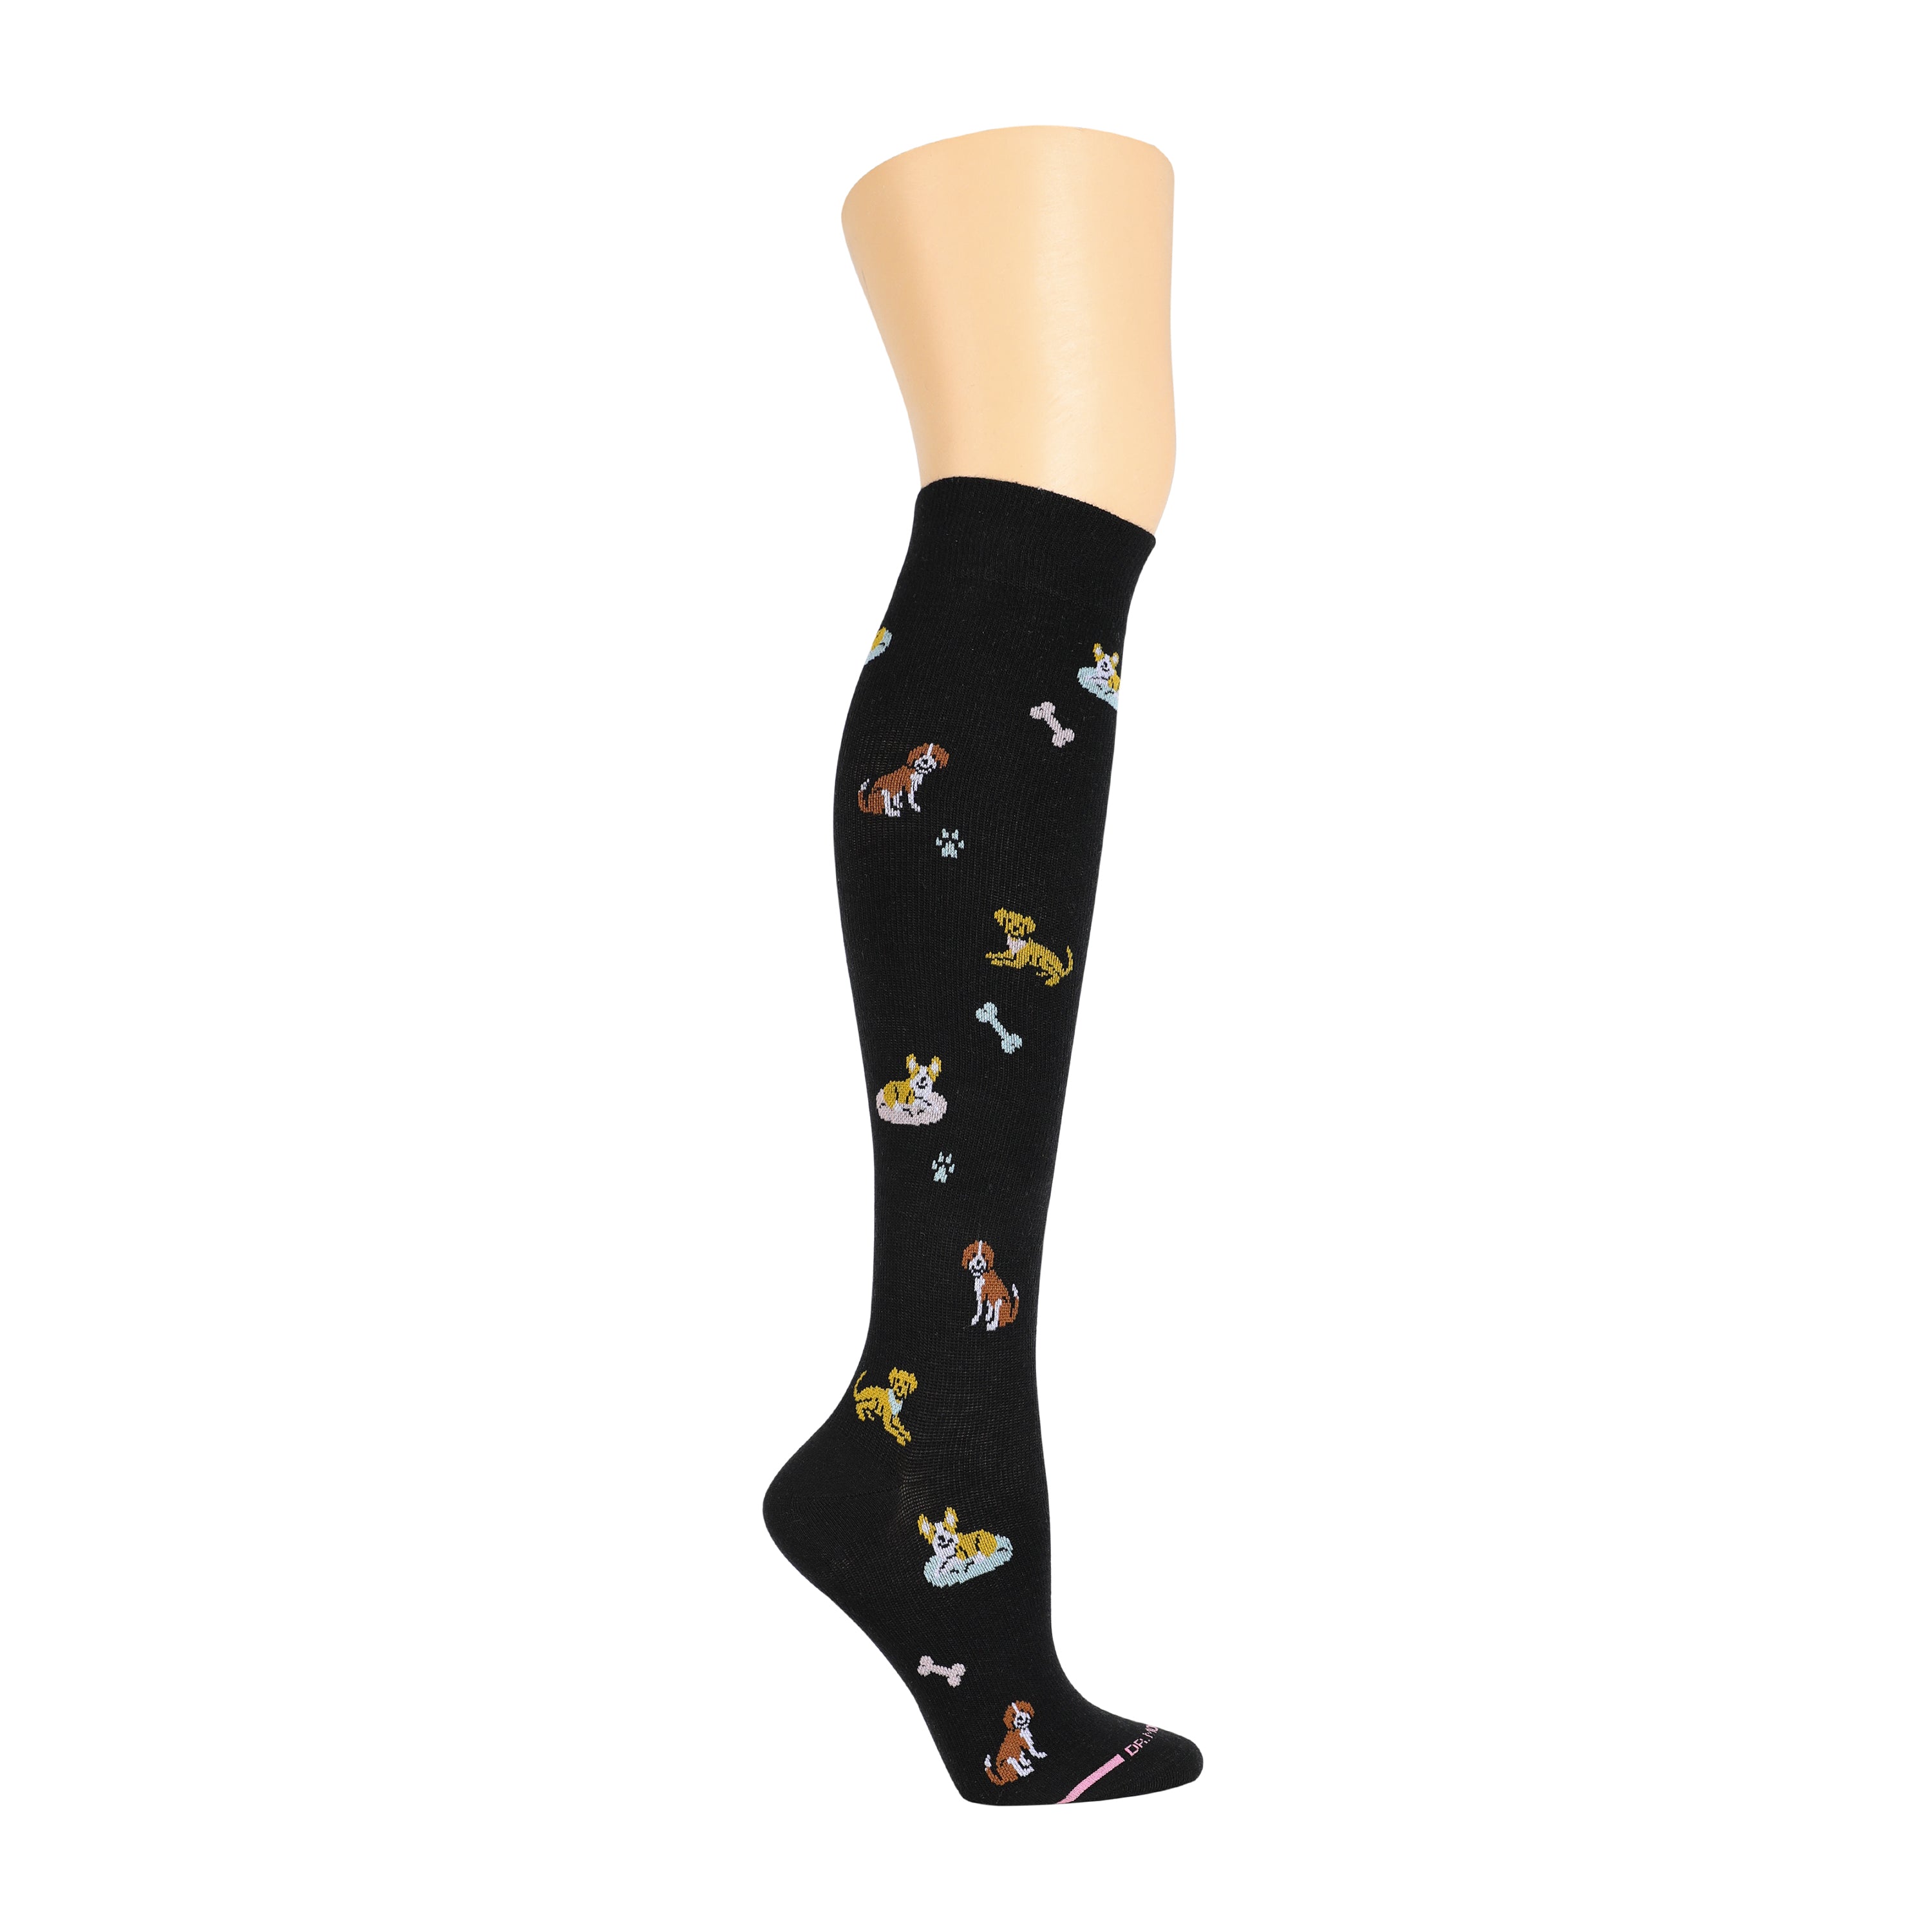 Cozy Dogs | Knee-High Compression Socks For Women